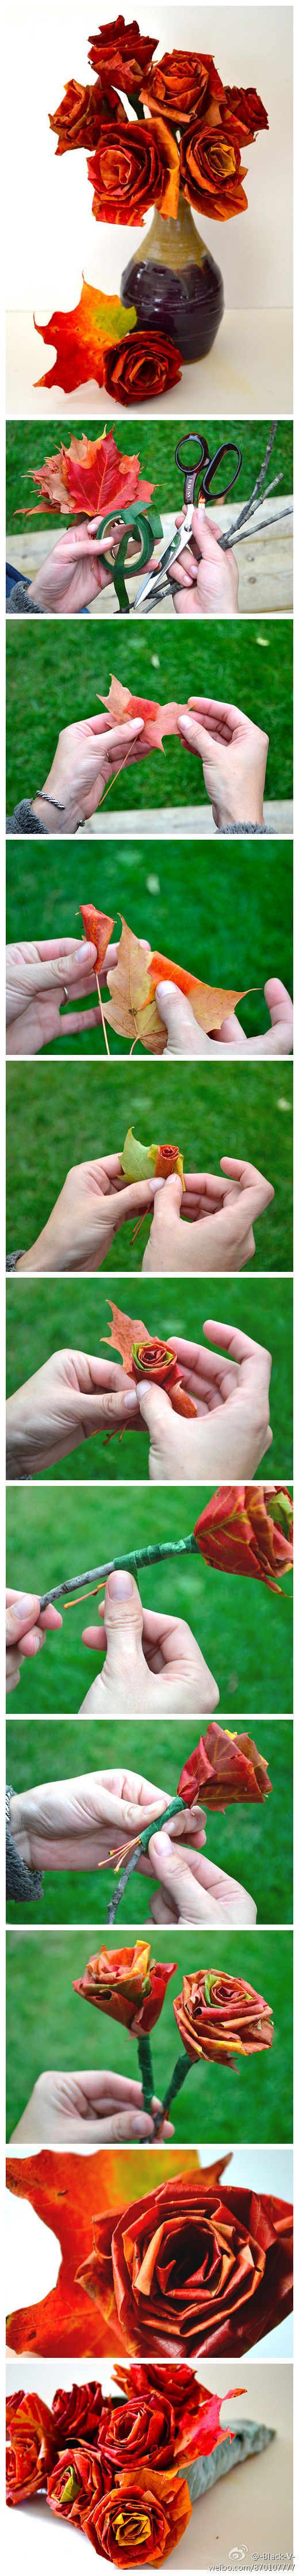 How to make Roses from Fall Leaves!